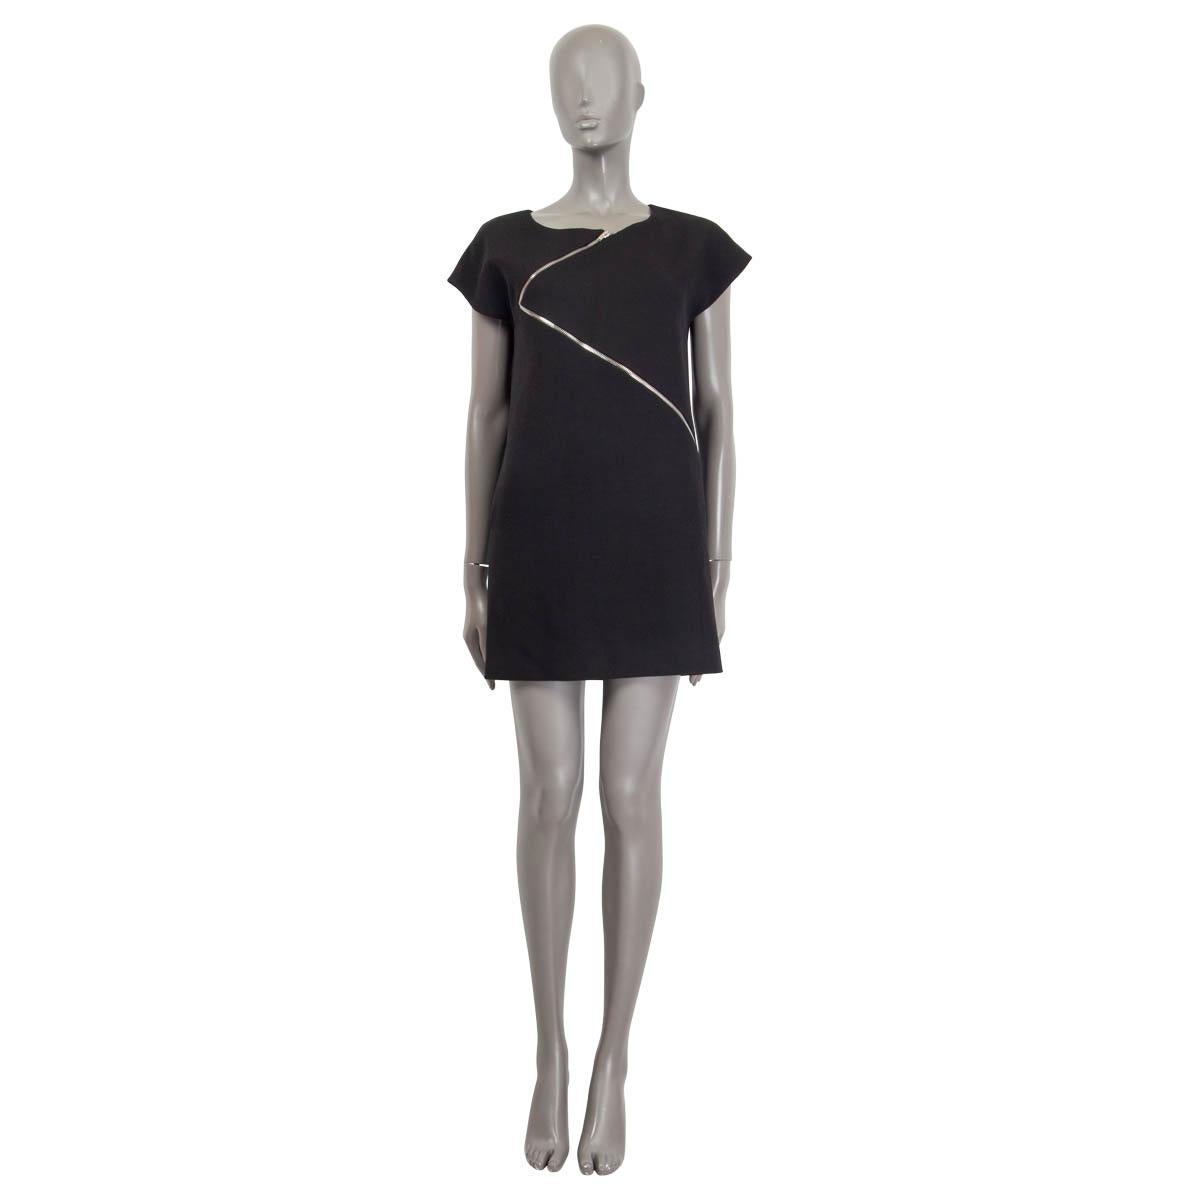 100% authentic Saint Laurent cap-sleeve shift dress in black wool (100%). With diagonal zipper details on the front and two slit pockets on the sides. Closes with hook and concealed zipper on the back. Lined in black silk (100%). Has been worn and